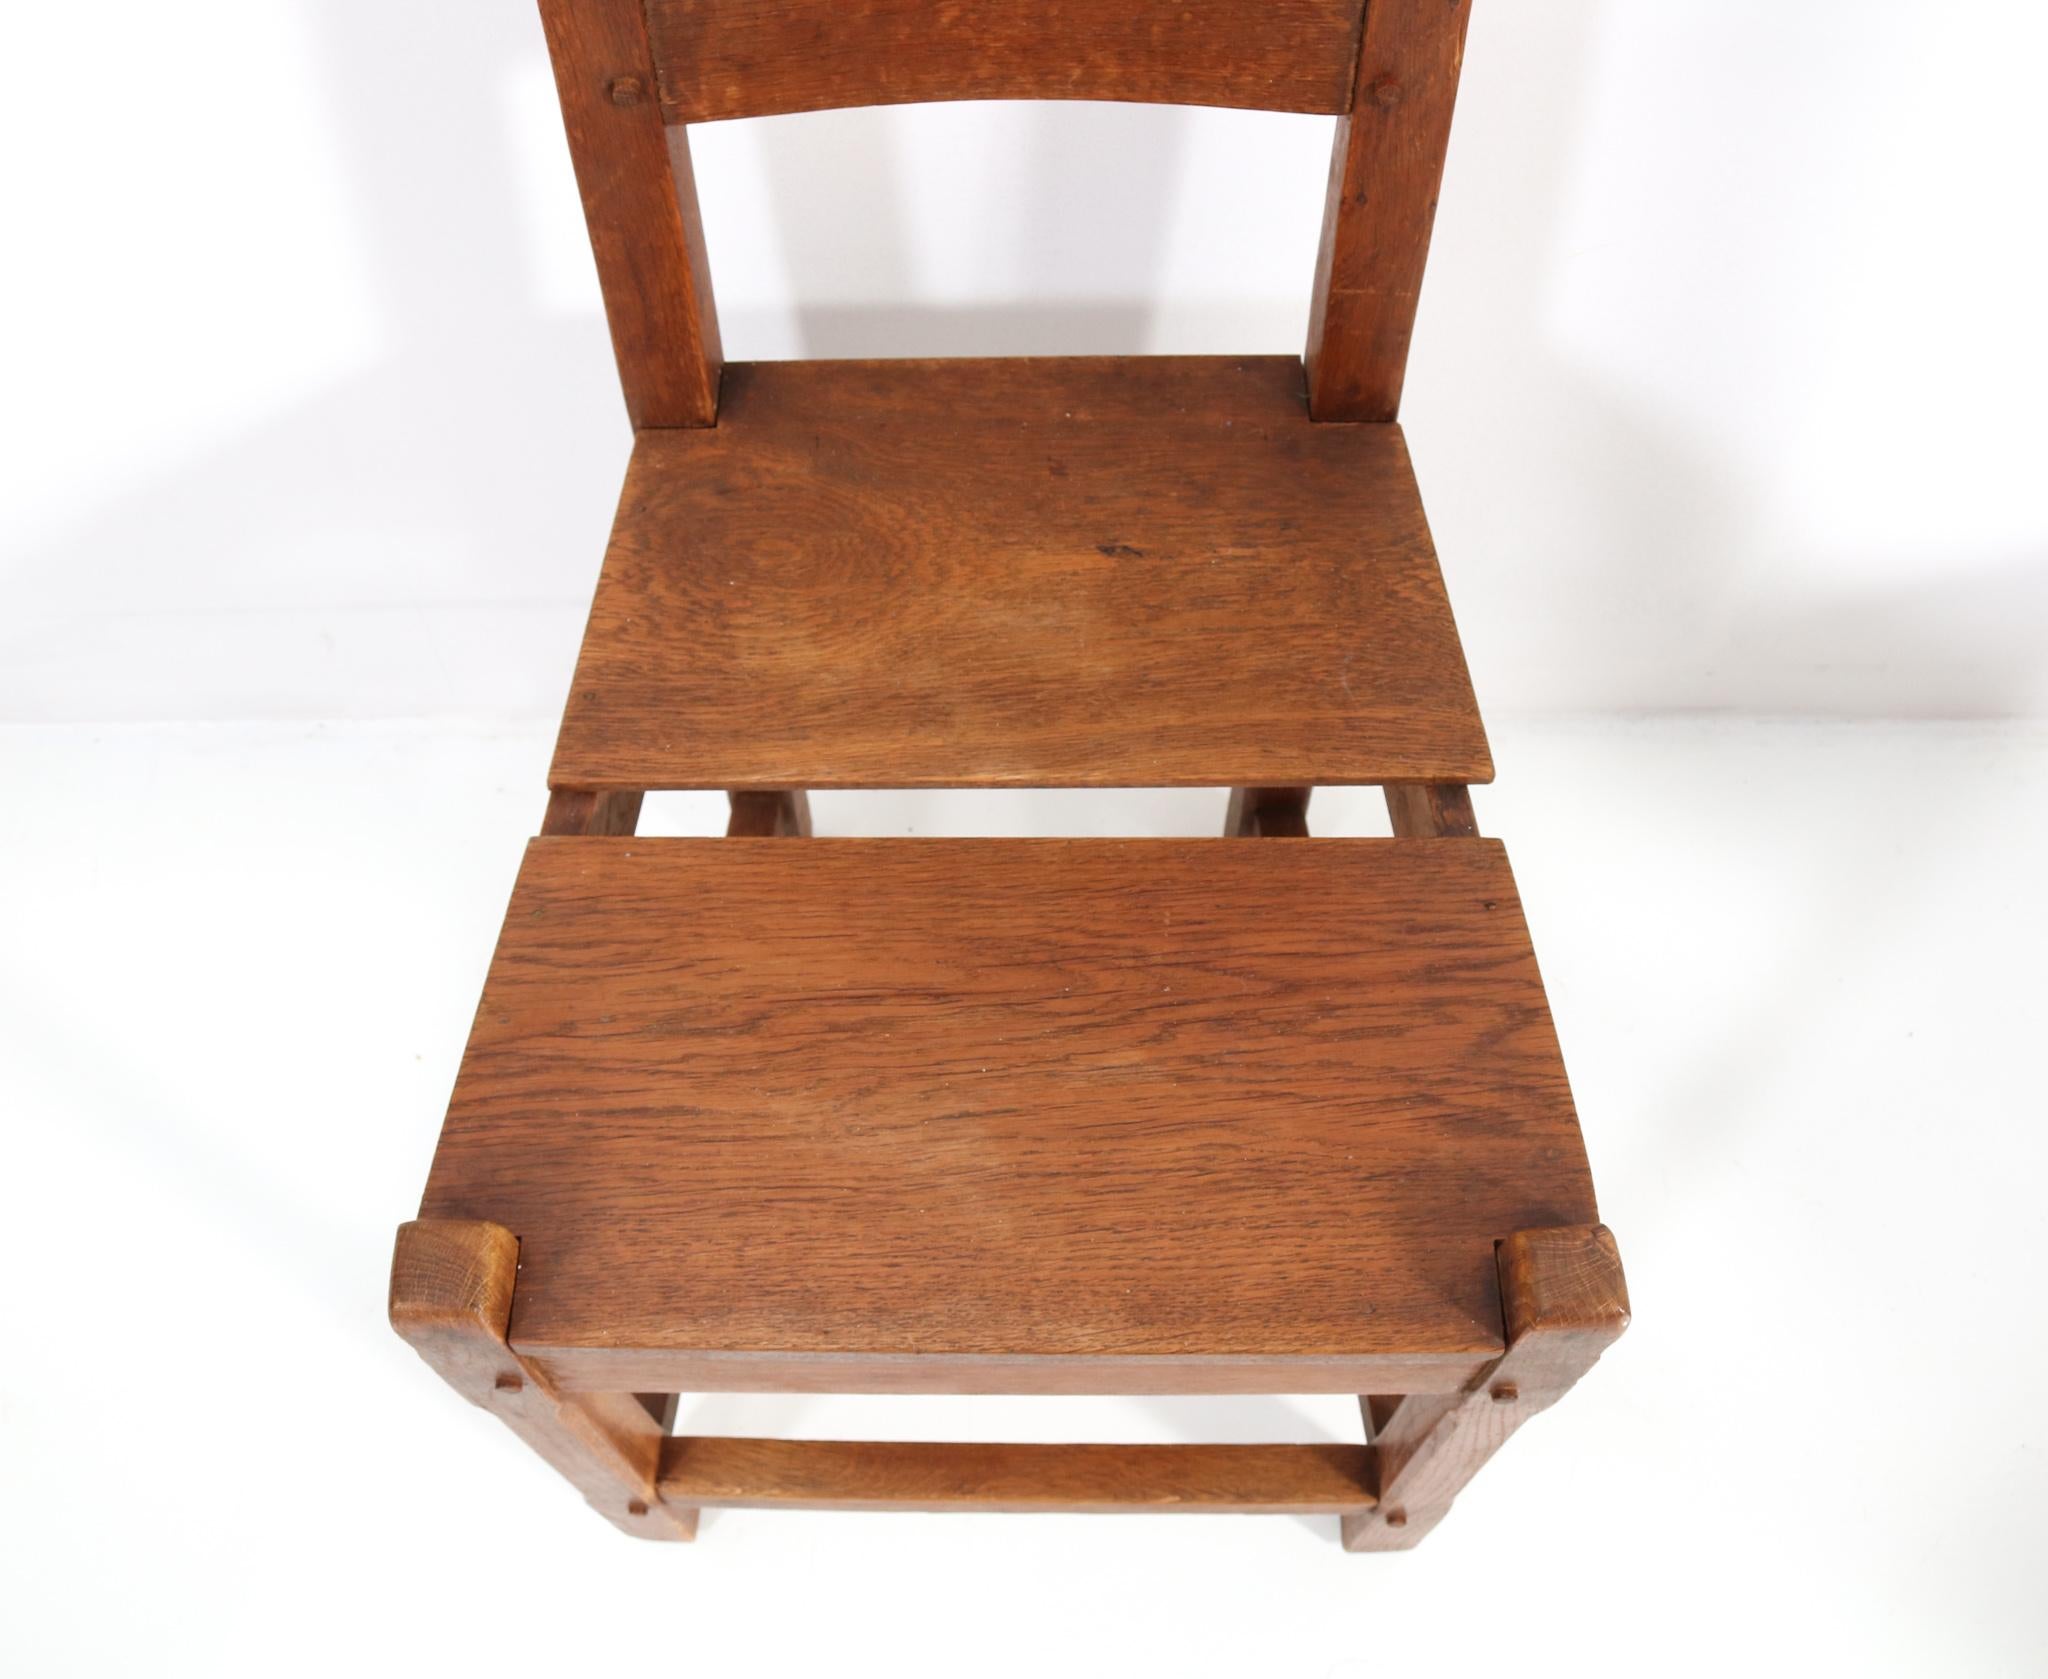 Four Oak Rustic Brutalist Chairs, 1940s For Sale 2